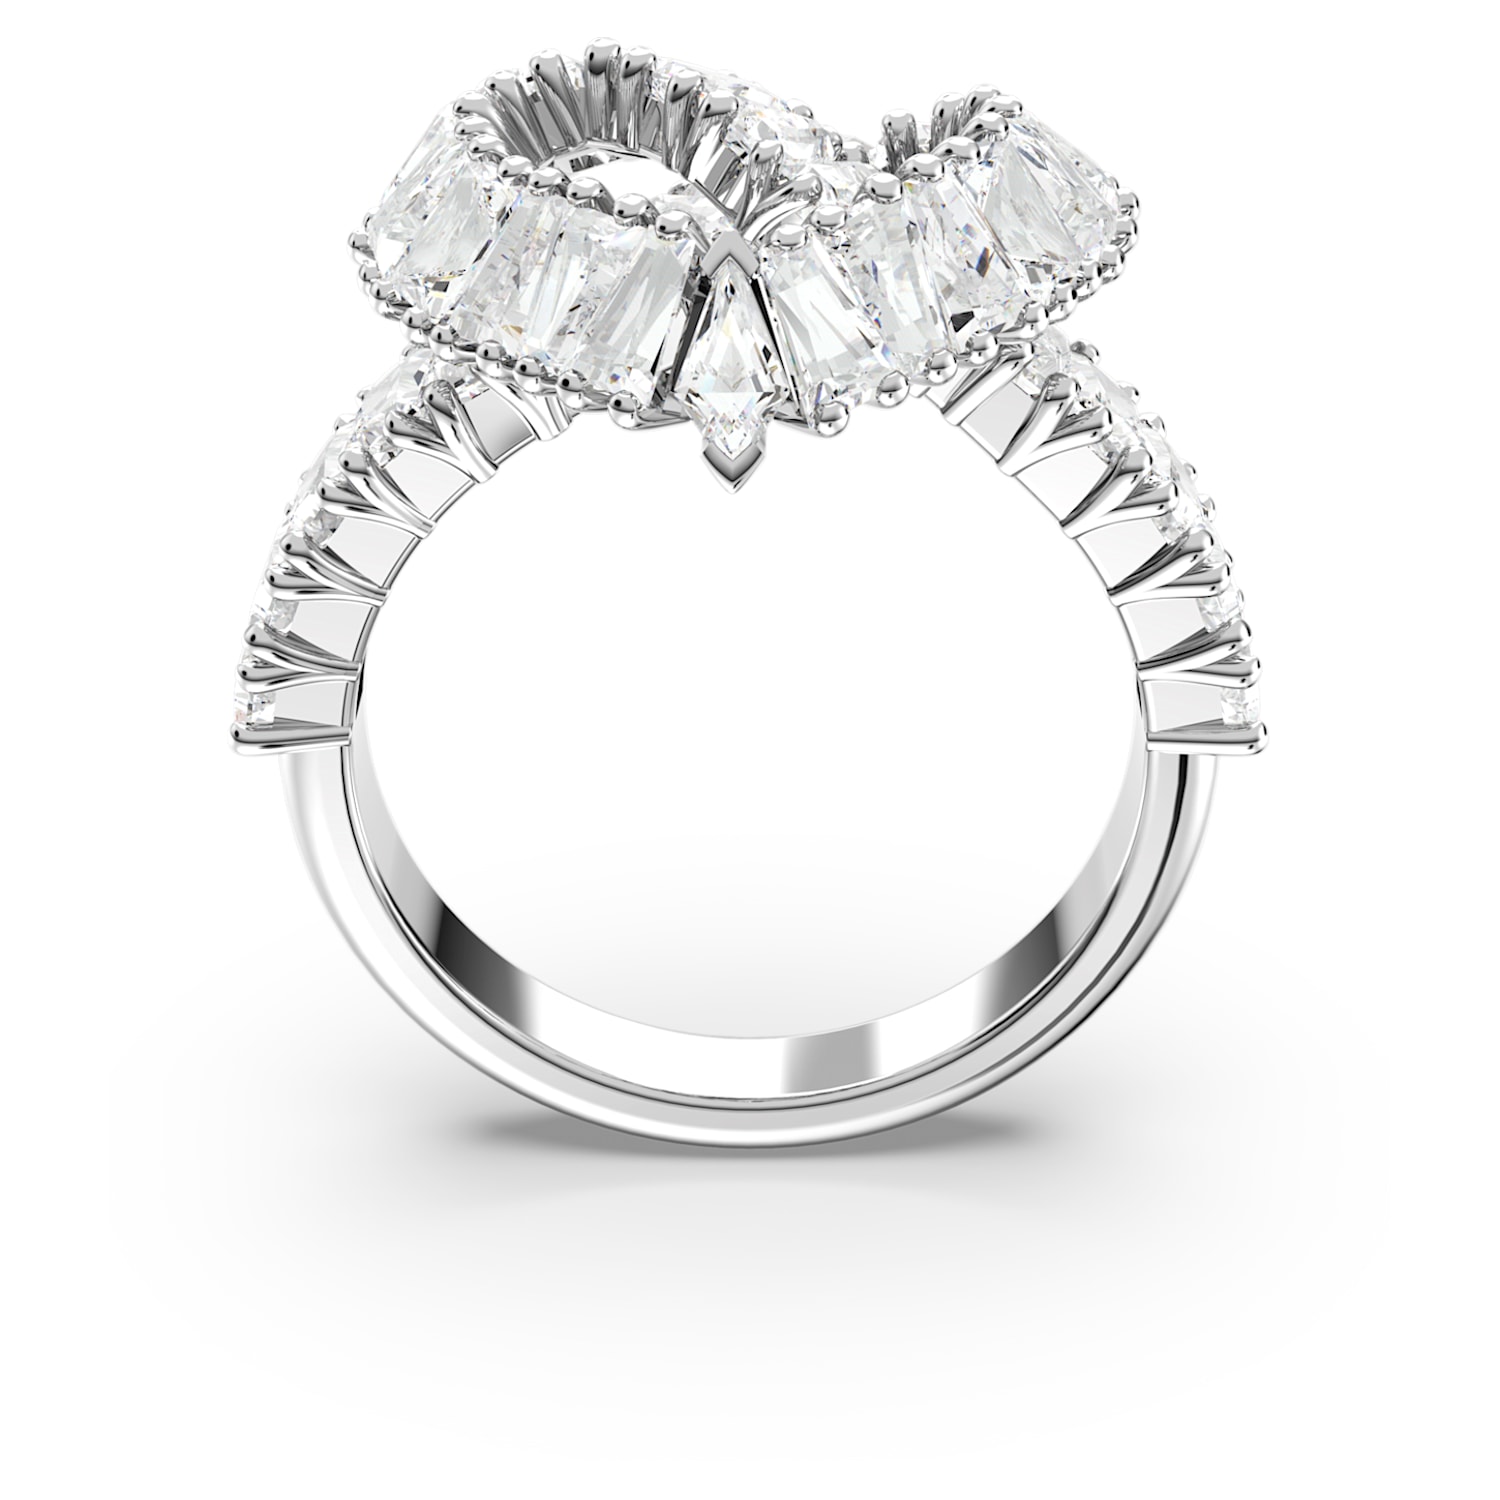 Matrix cocktail ring, Mixed cuts, Heart, White, Rhodium plated 